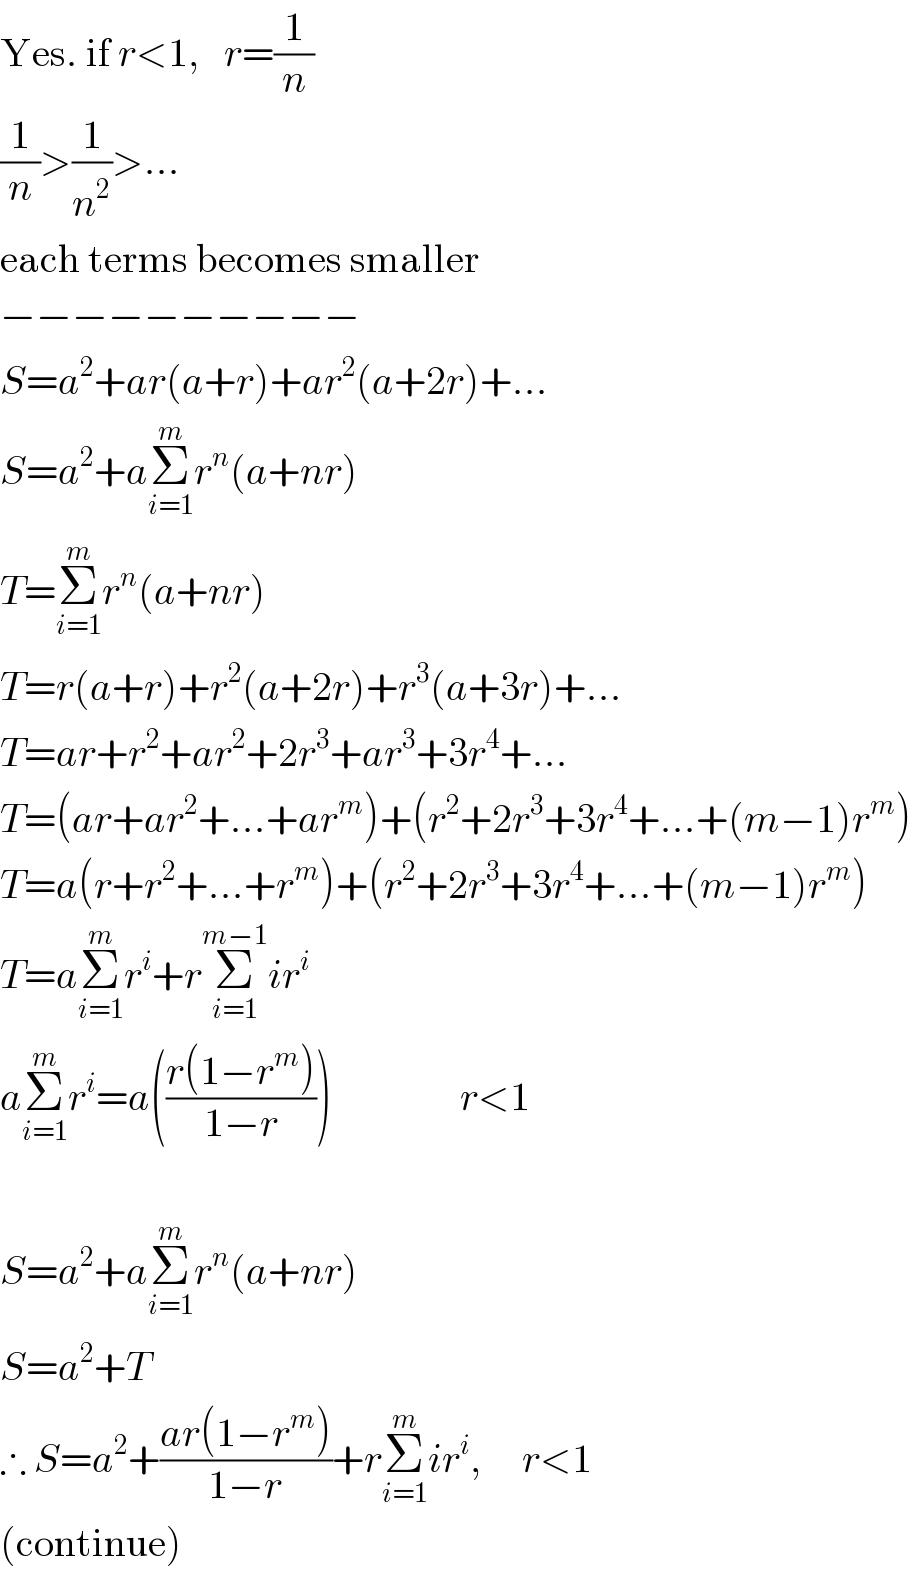 Yes. if r<1,   r=(1/n)  (1/n)>(1/n^2 )>...  each terms becomes smaller  −−−−−−−−−−  S=a^2 +ar(a+r)+ar^2 (a+2r)+...  S=a^2 +aΣ_(i=1) ^m r^n (a+nr)  T=Σ_(i=1) ^m r^n (a+nr)  T=r(a+r)+r^2 (a+2r)+r^3 (a+3r)+...  T=ar+r^2 +ar^2 +2r^3 +ar^3 +3r^4 +...  T=(ar+ar^2 +...+ar^m )+(r^2 +2r^3 +3r^4 +...+(m−1)r^m )  T=a(r+r^2 +...+r^m )+(r^2 +2r^3 +3r^4 +...+(m−1)r^m )  T=aΣ_(i=1) ^m r^i +rΣ_(i=1) ^(m−1) ir^i   aΣ_(i=1) ^m r^i =a(((r(1−r^m ))/(1−r)))                r<1    S=a^2 +aΣ_(i=1) ^m r^n (a+nr)  S=a^2 +T  ∴ S=a^2 +((ar(1−r^m ))/(1−r))+rΣ_(i=1) ^m ir^i ,     r<1  (continue)  